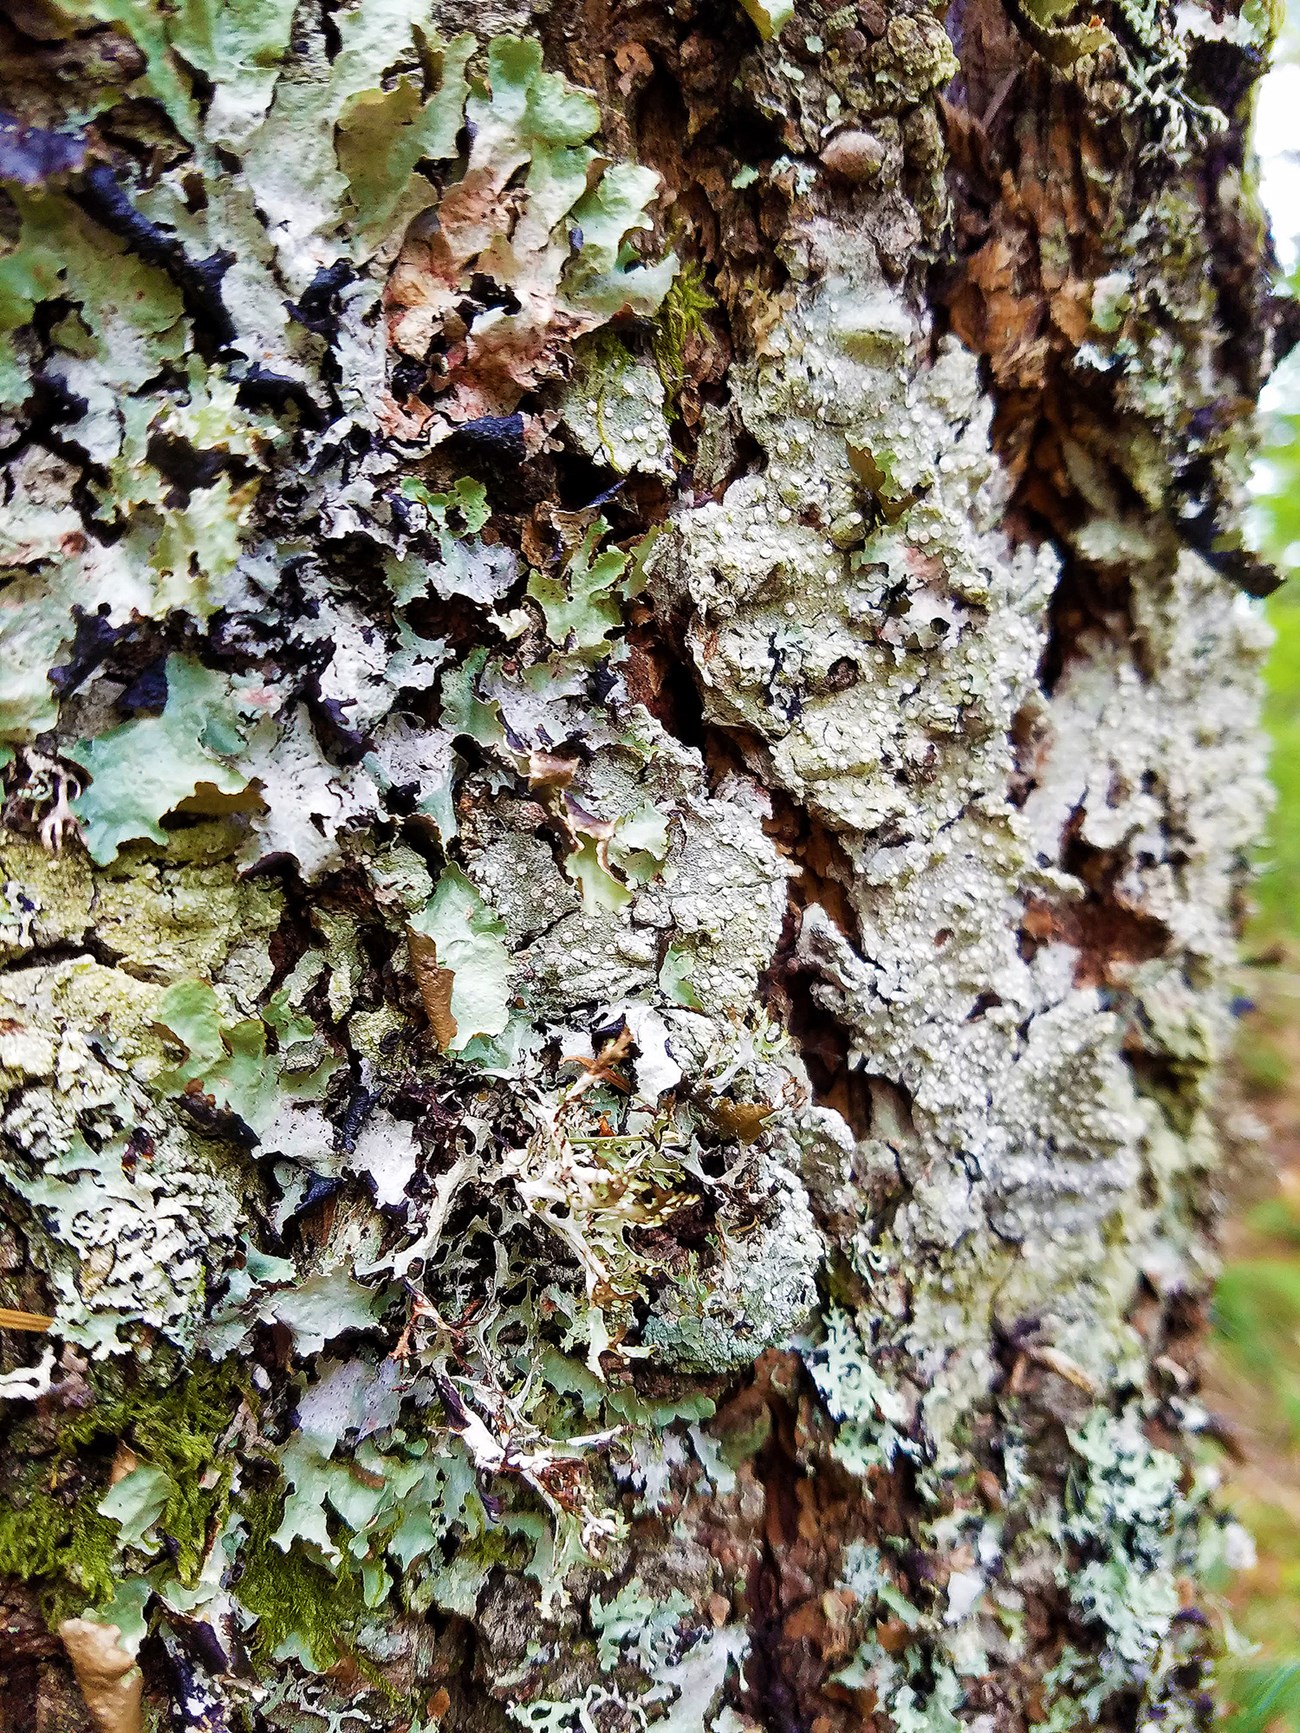 white and green scaly lichen adorns the side of a tree trunk